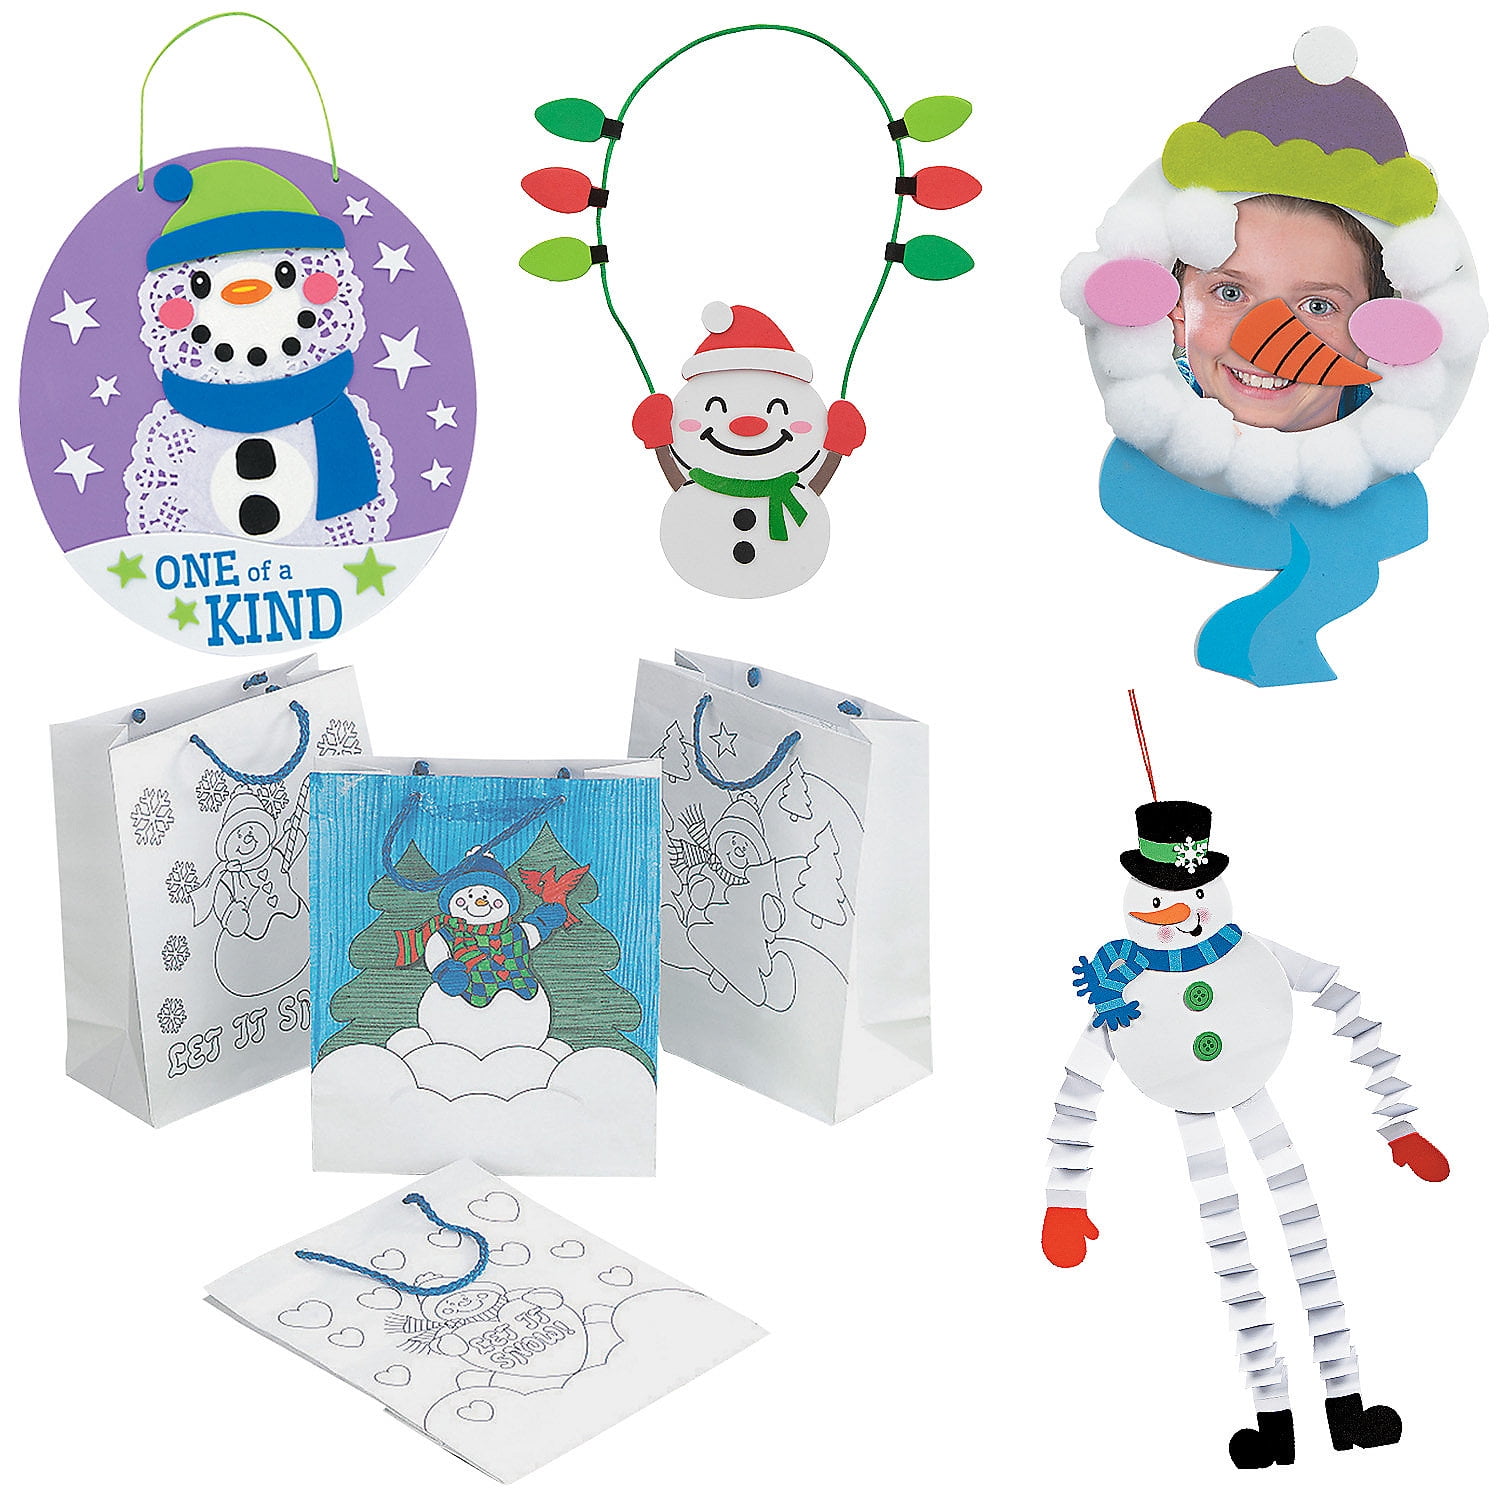 3 Snowman Crafts - How To Run A Home Daycare